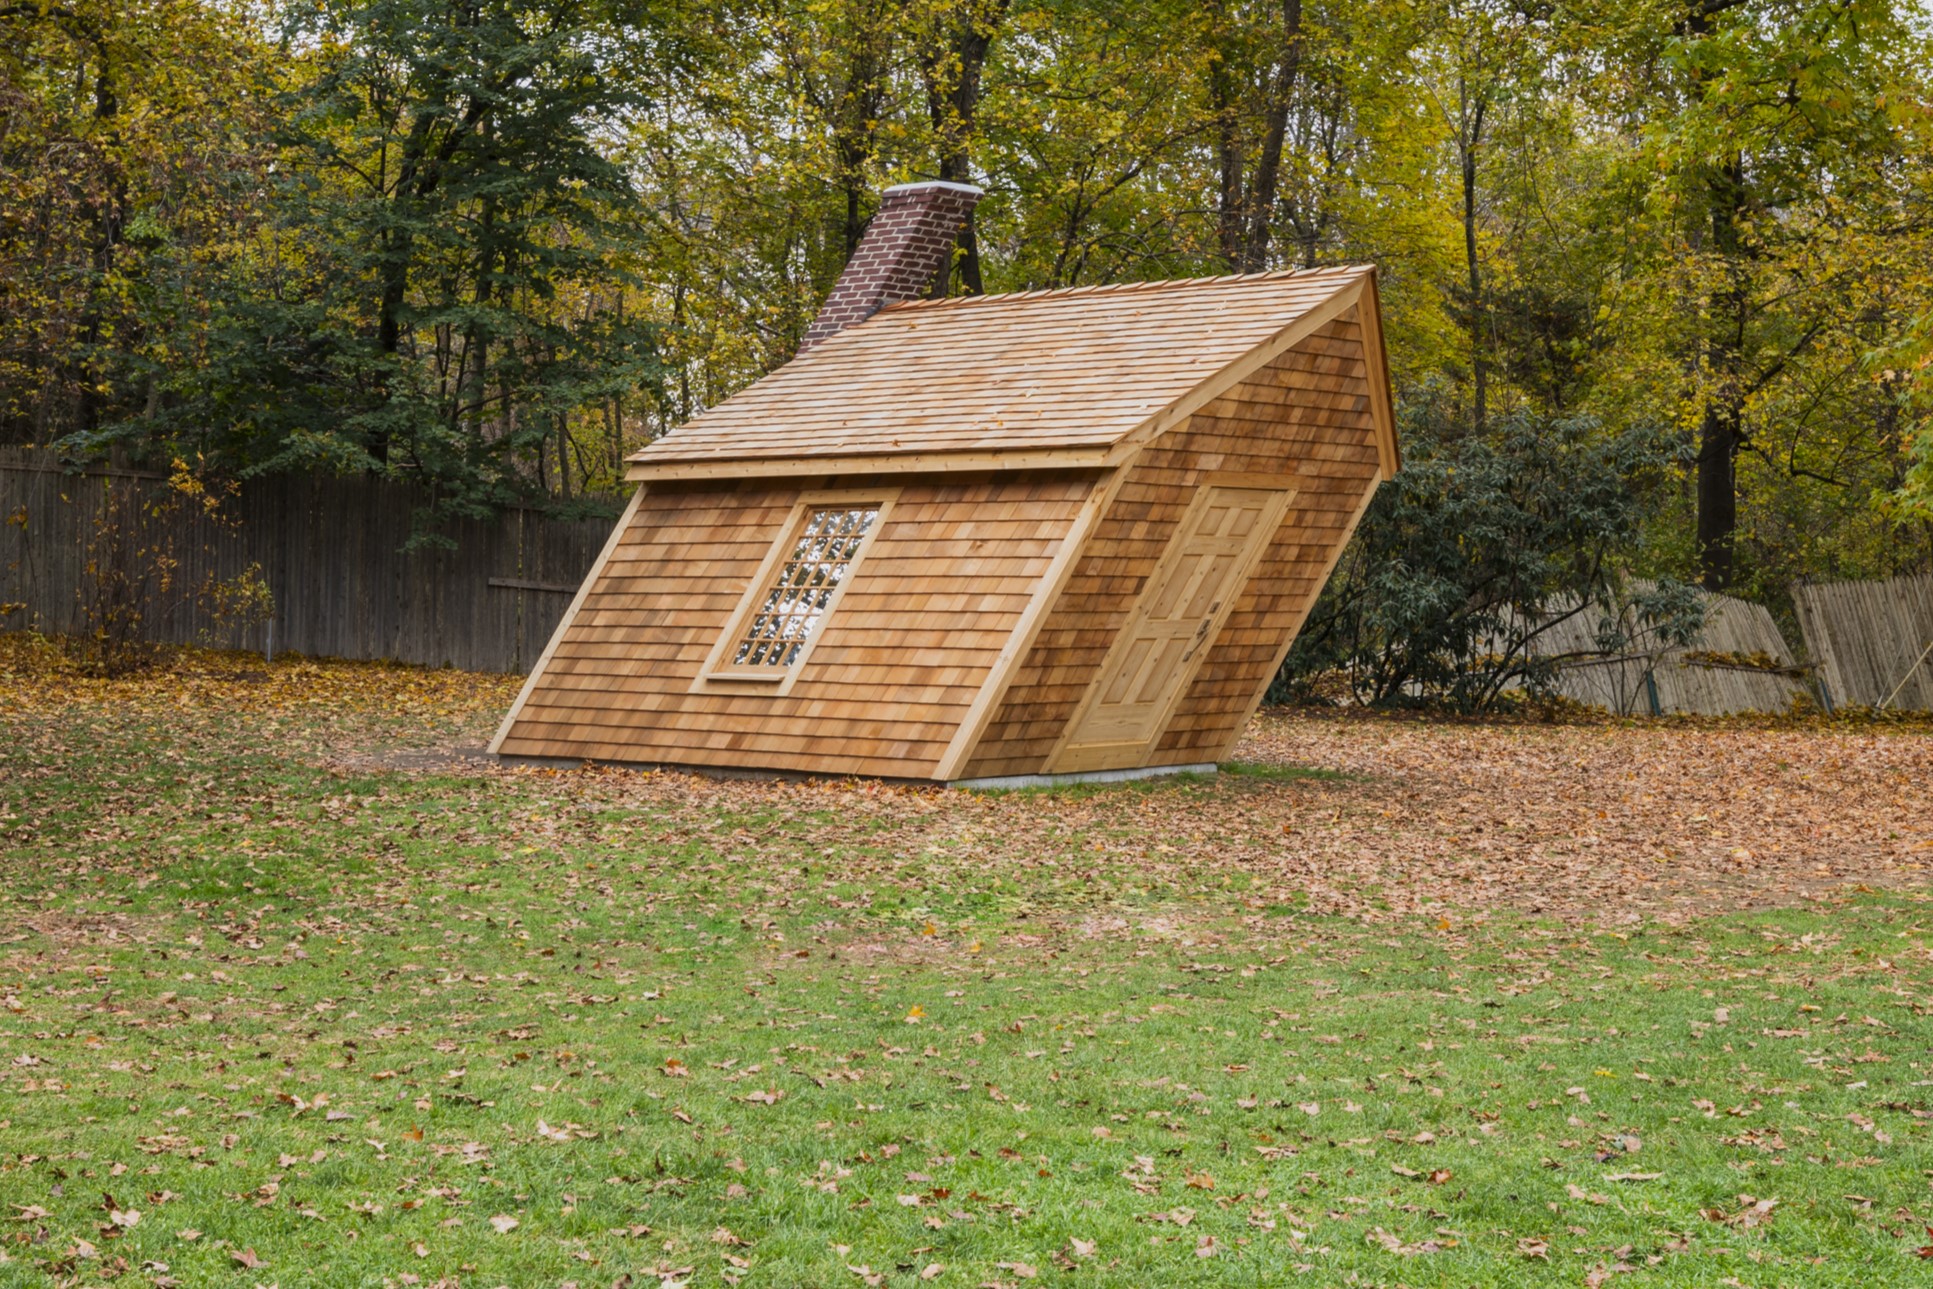 A slanted cabin with shingles and a brick chimney in the style of Thoreau's cabin at Walden